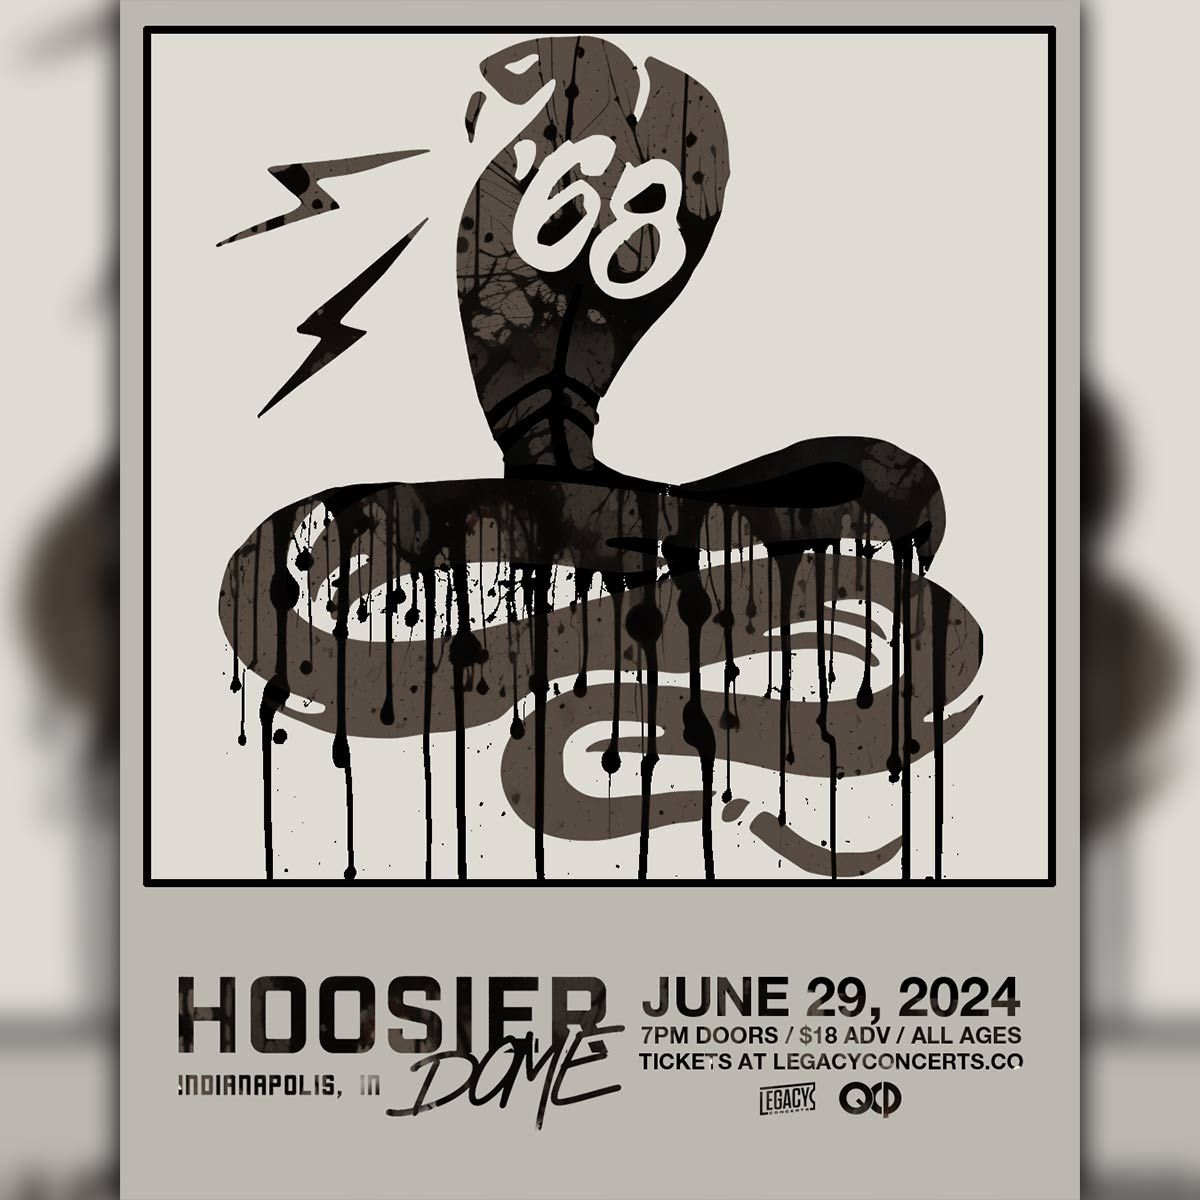 '68 at Hoosier Dome